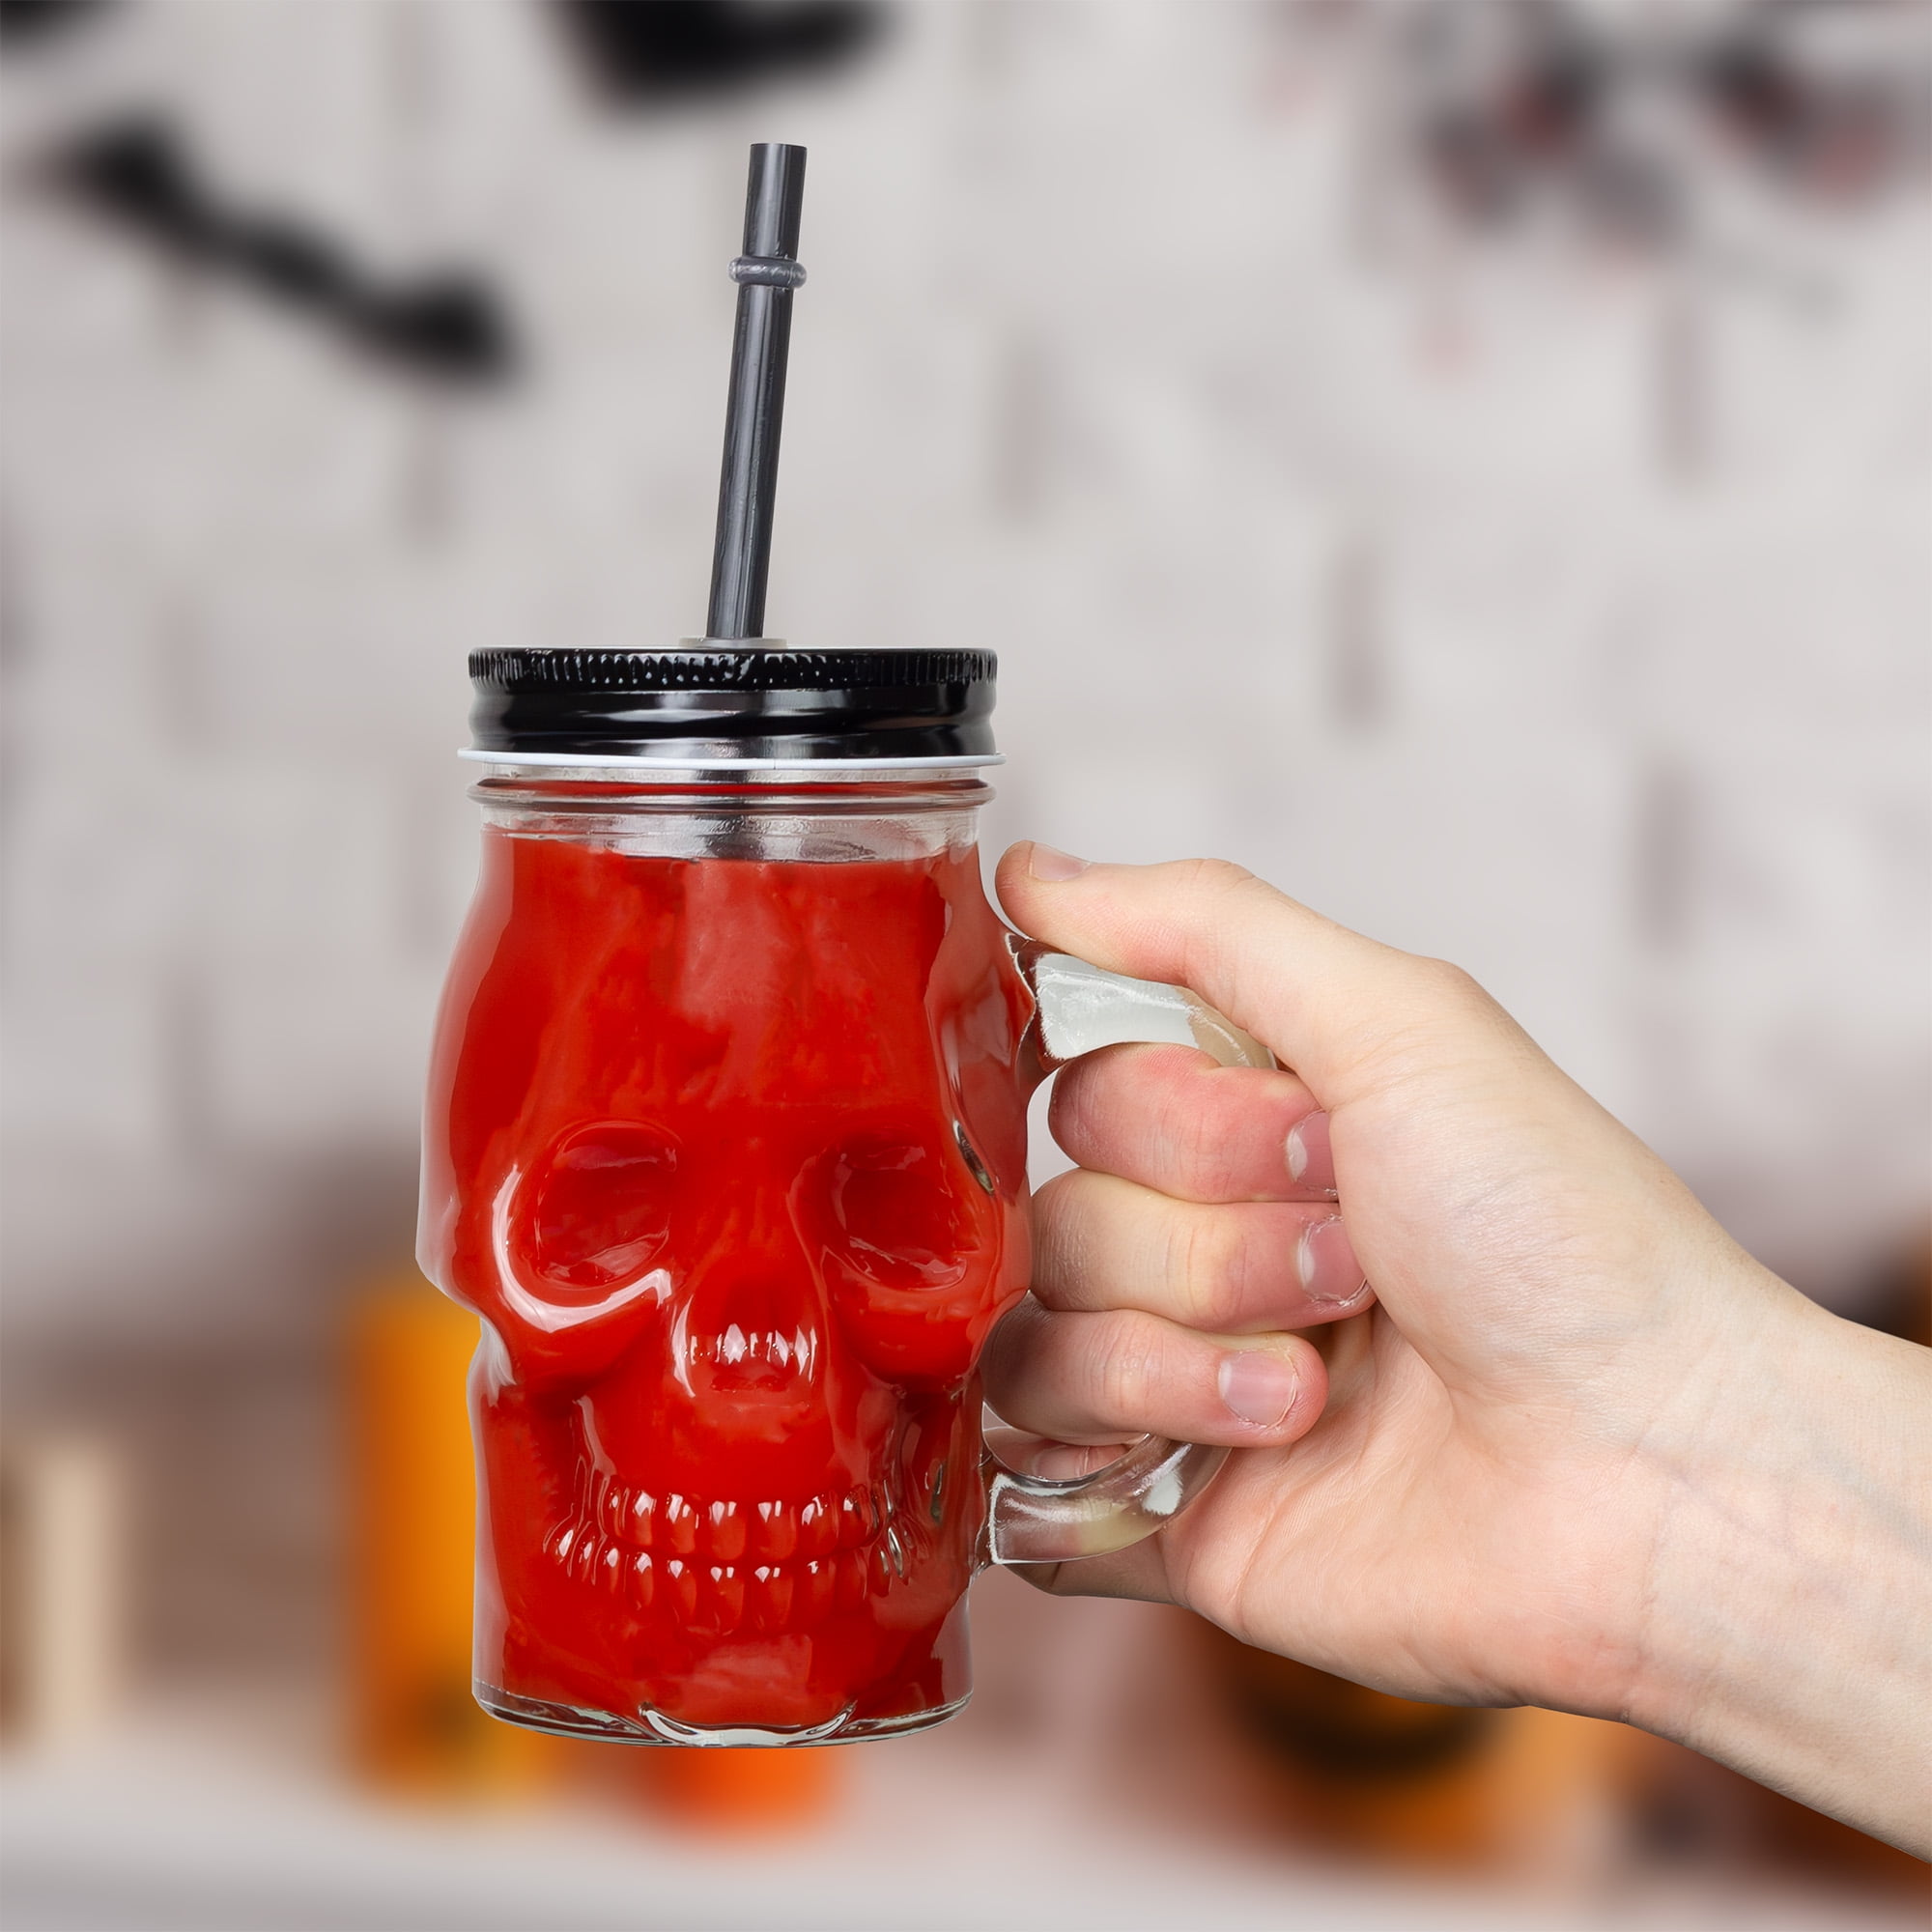 Way To Celebrate Glass Skull Sipper with Lid and Straw, Orange, 18 oz 